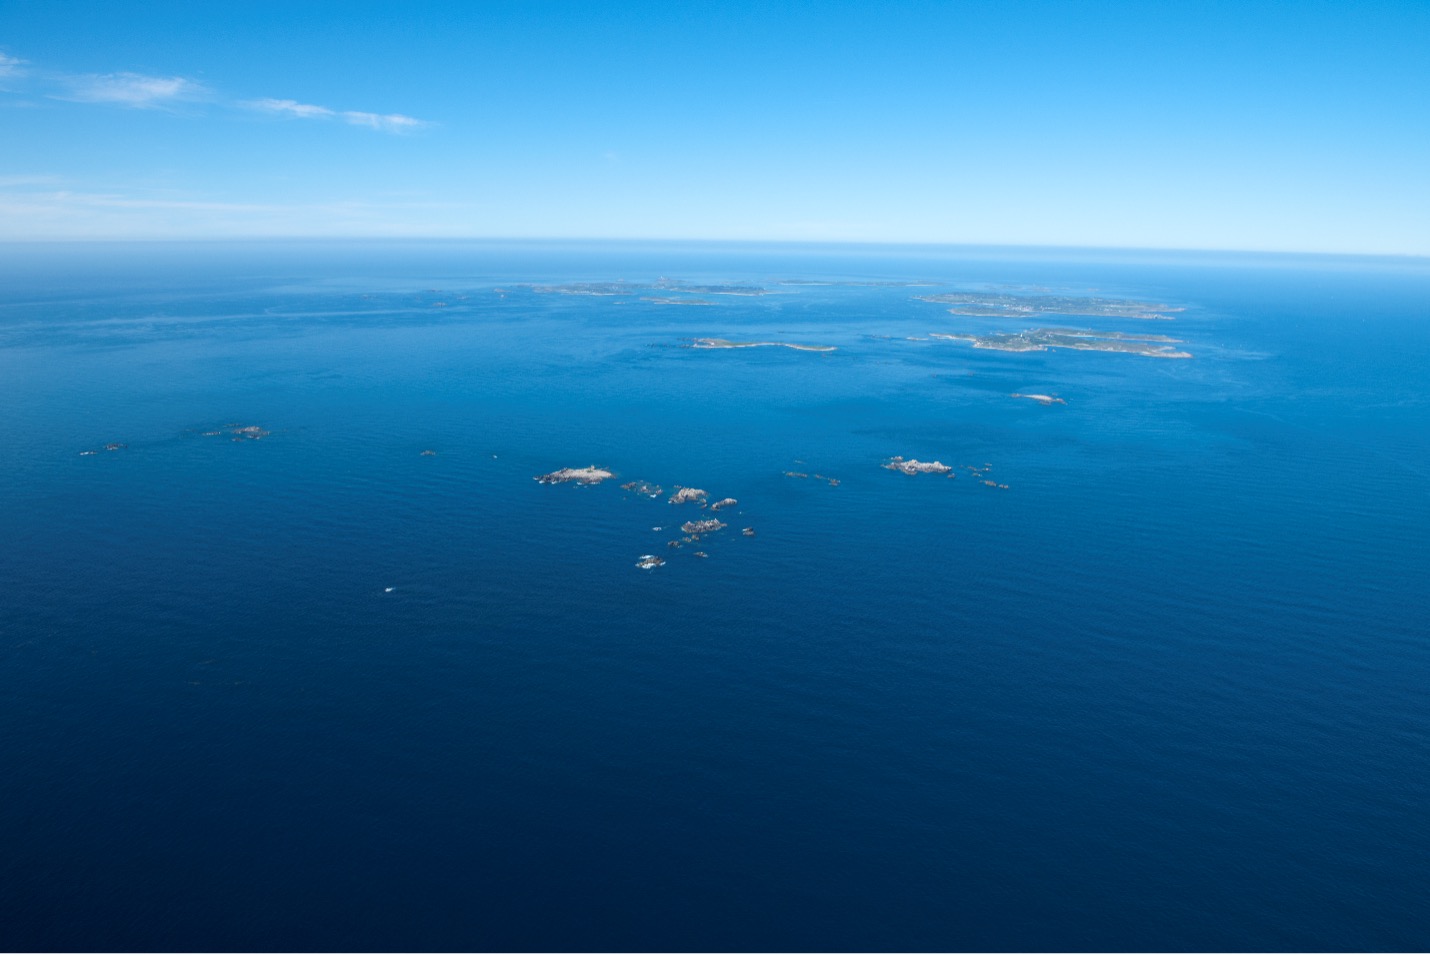 Today’s Isles of Scilly from the air: 12,000 years ago this archipelago was one large island